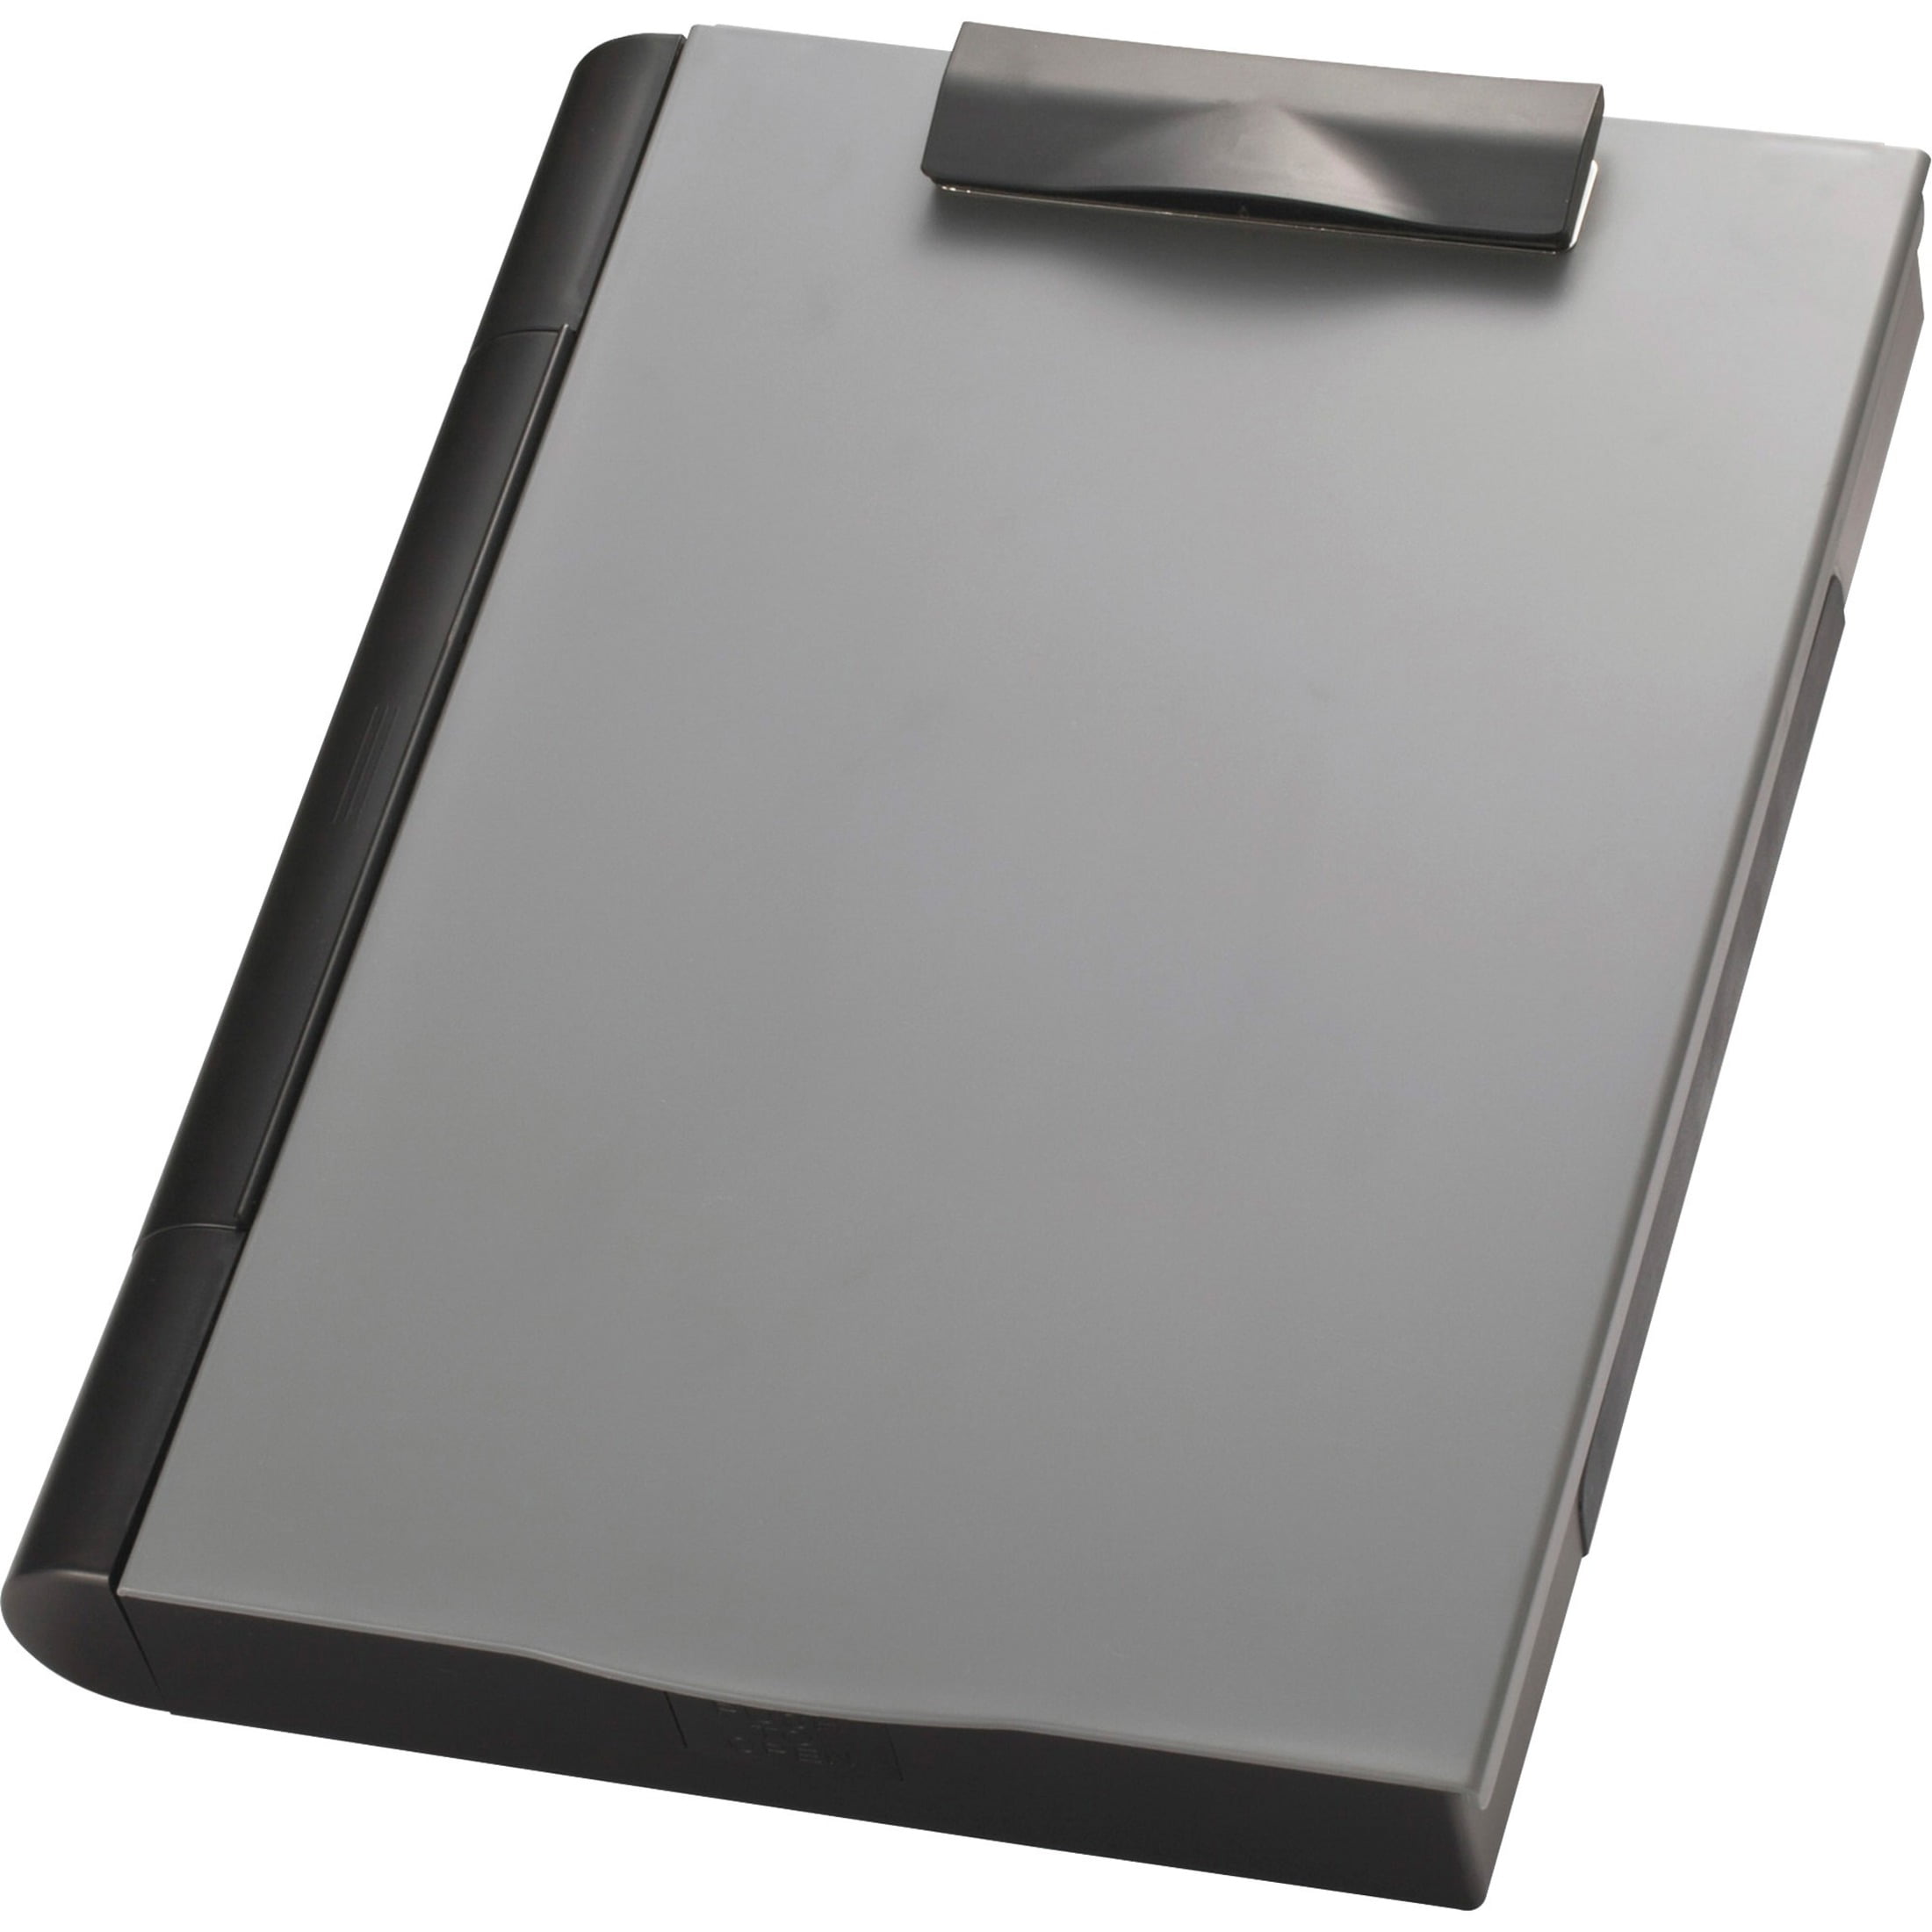 A4 Foldover Clipboard With Two Storage Pockets A4 Document Holder Black or Clear 